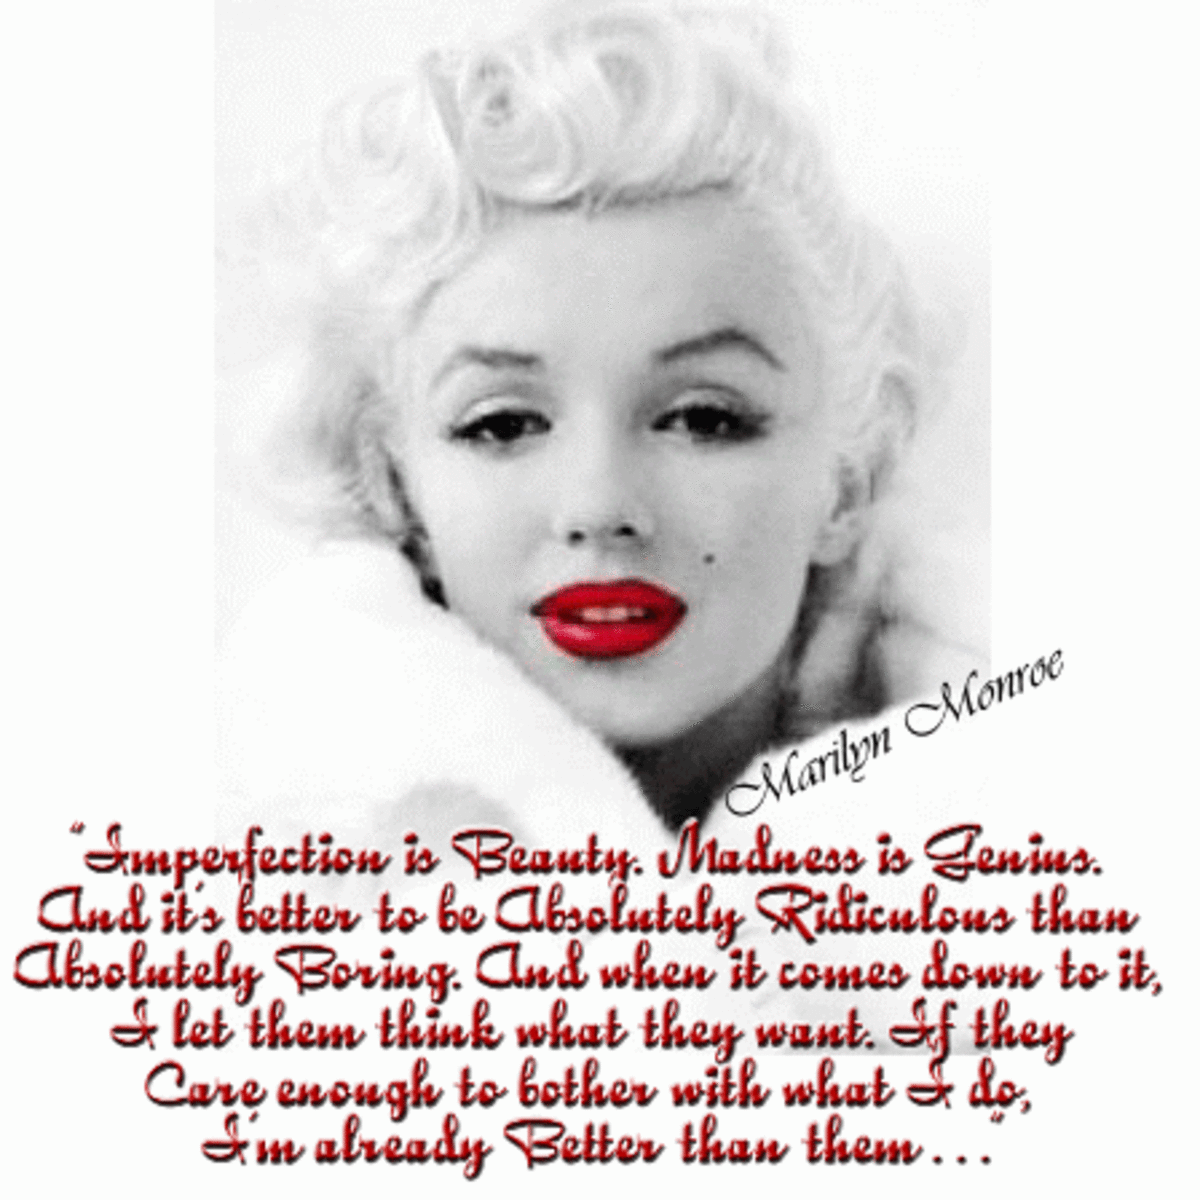 Marilyn Monroe and Aspergers Syndrome?